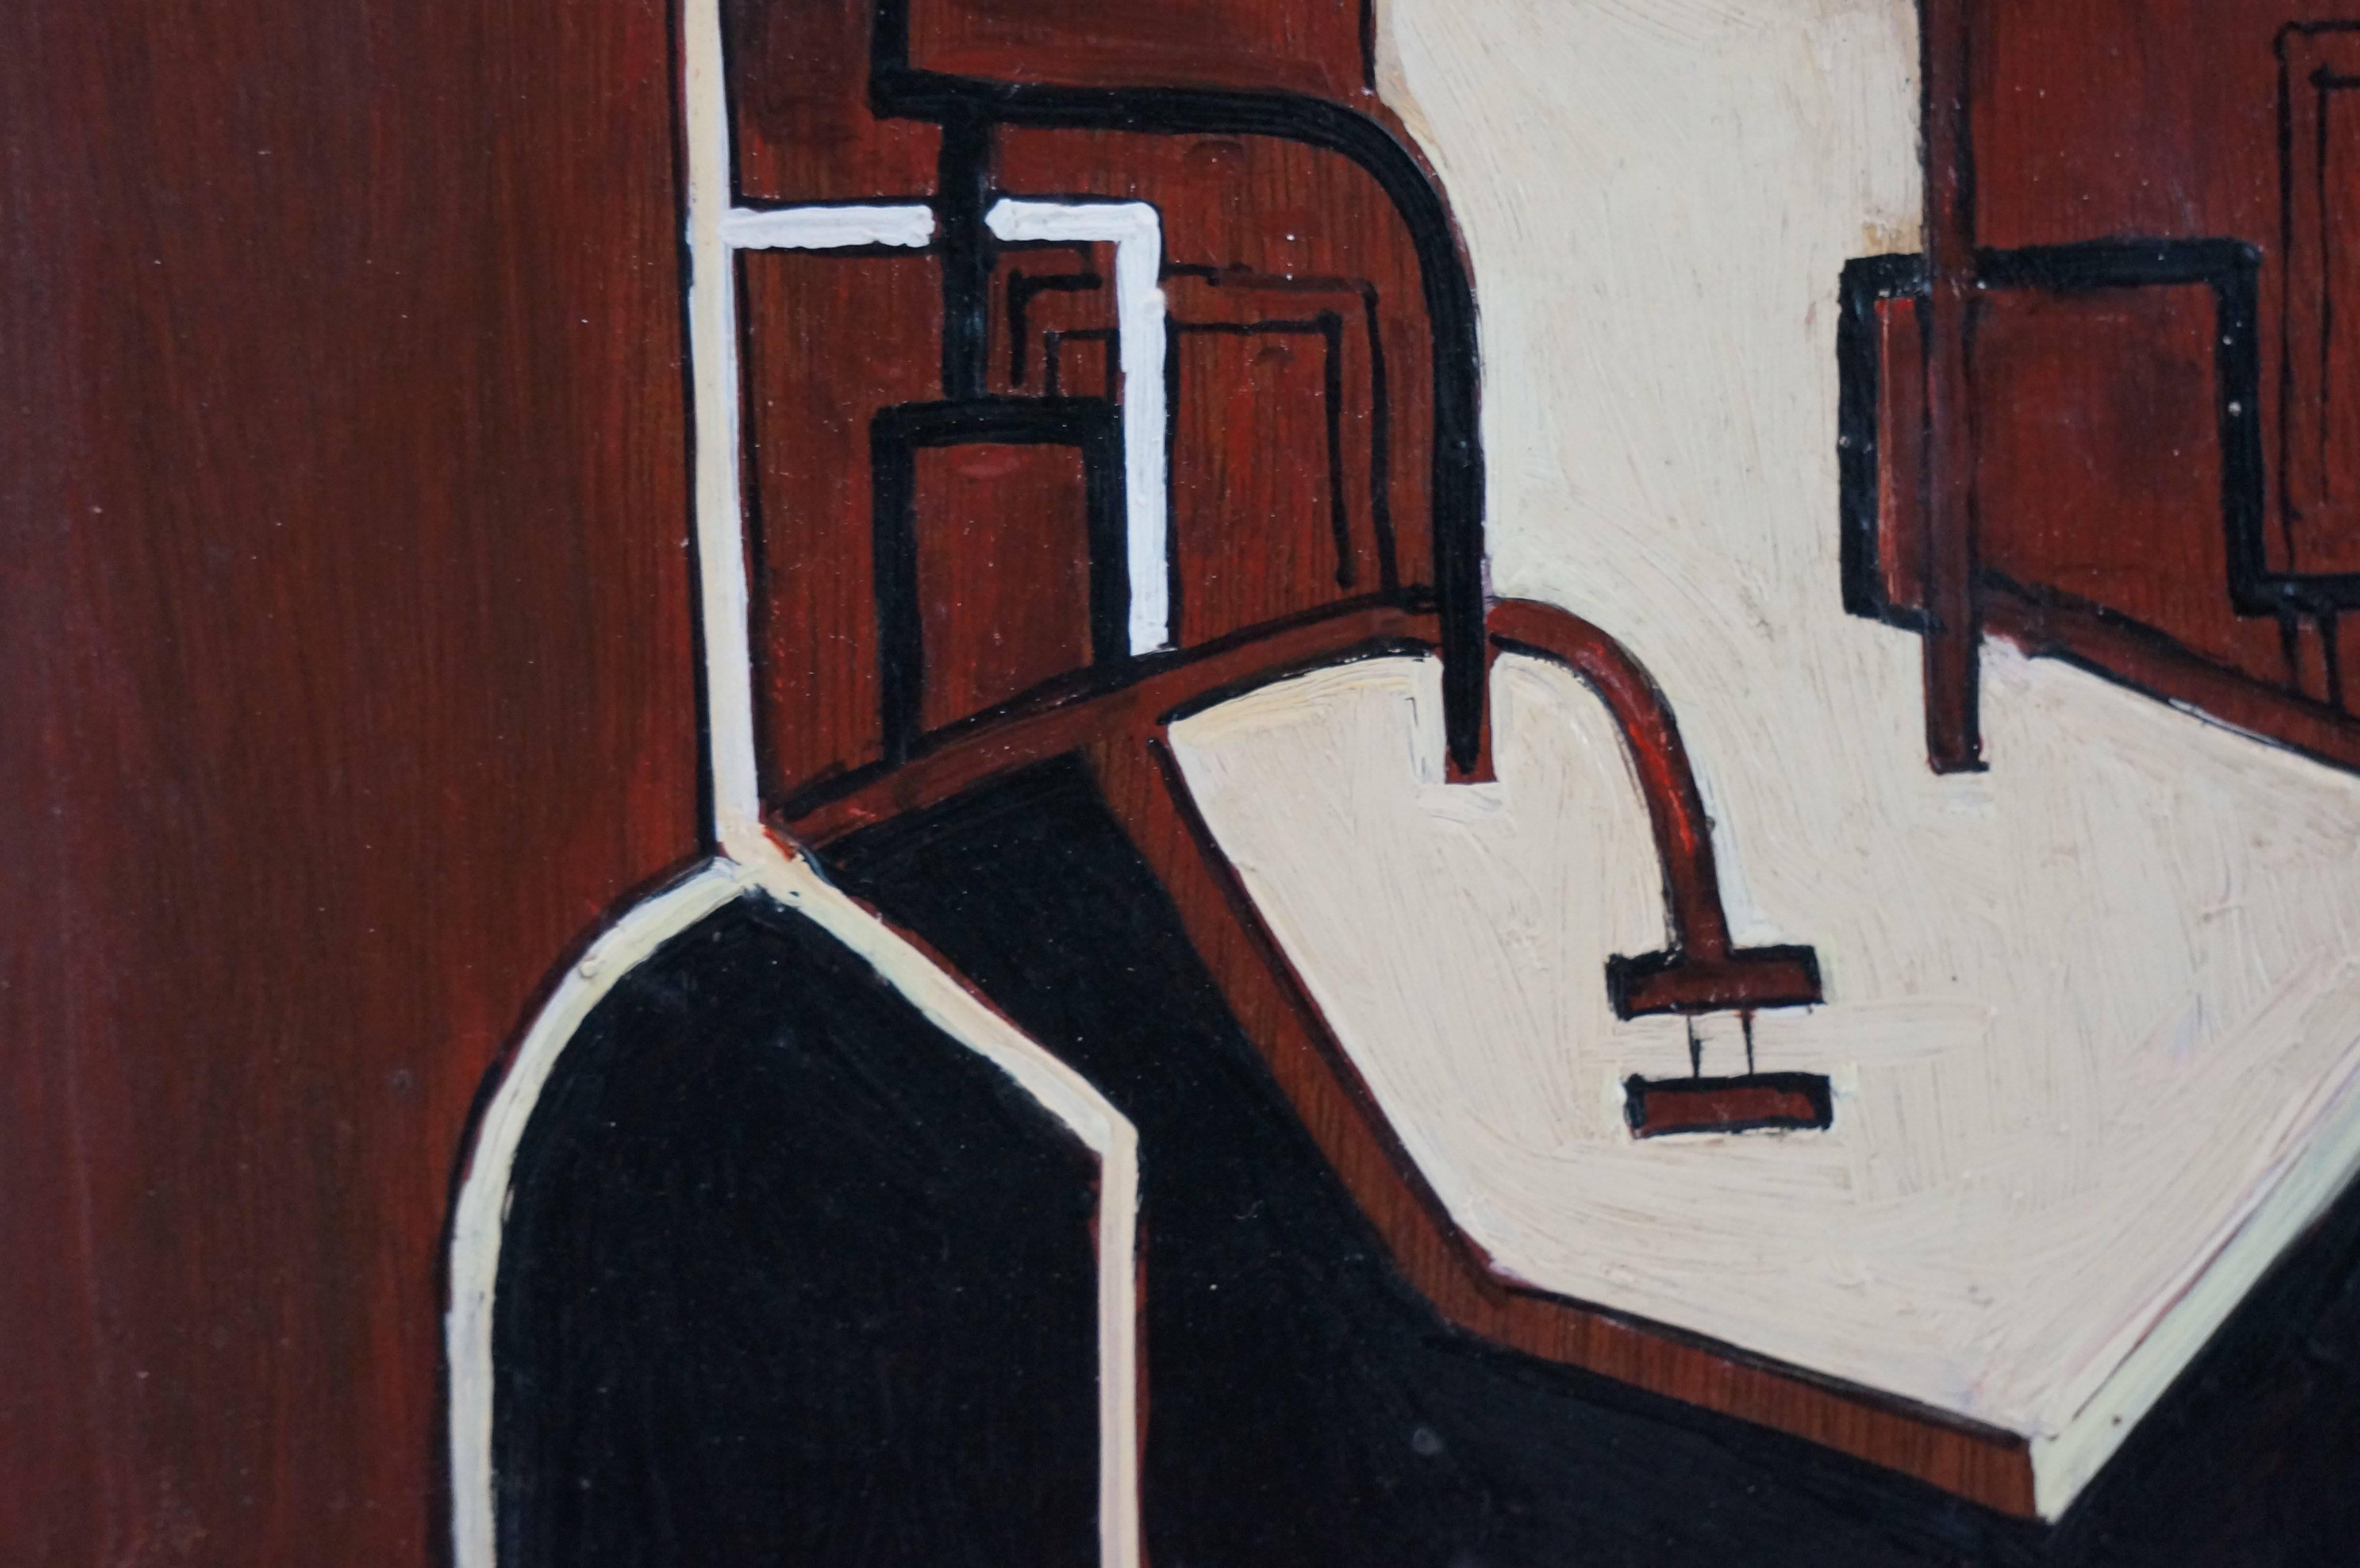 Oil on plywood, monogram on back. Overall dimensions: height 72cm x 54cm
Natalia Gontcharova (1881-1962)
In 1901, in Moscow, she studied sculpture at F. Volnoukhine and Paul Troubetzkoy, and painting at Constantin Korovine. She left the sculpture in